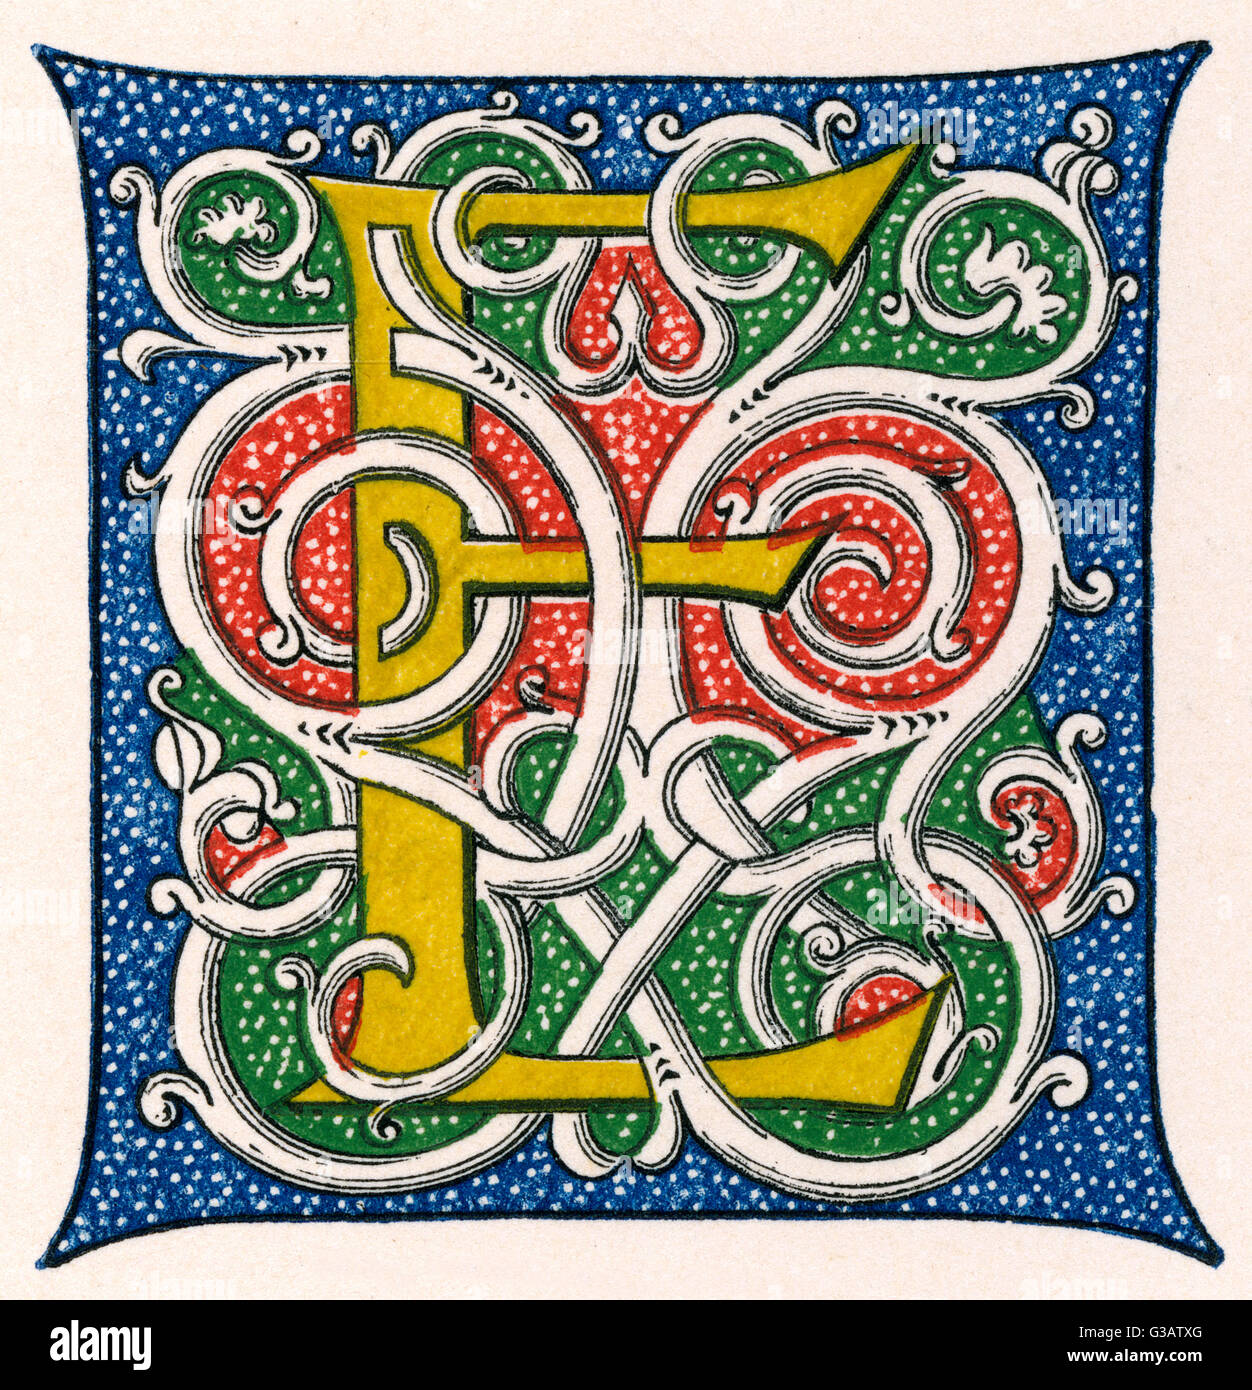 Illuminated letter E in a medieval style Stock Photo